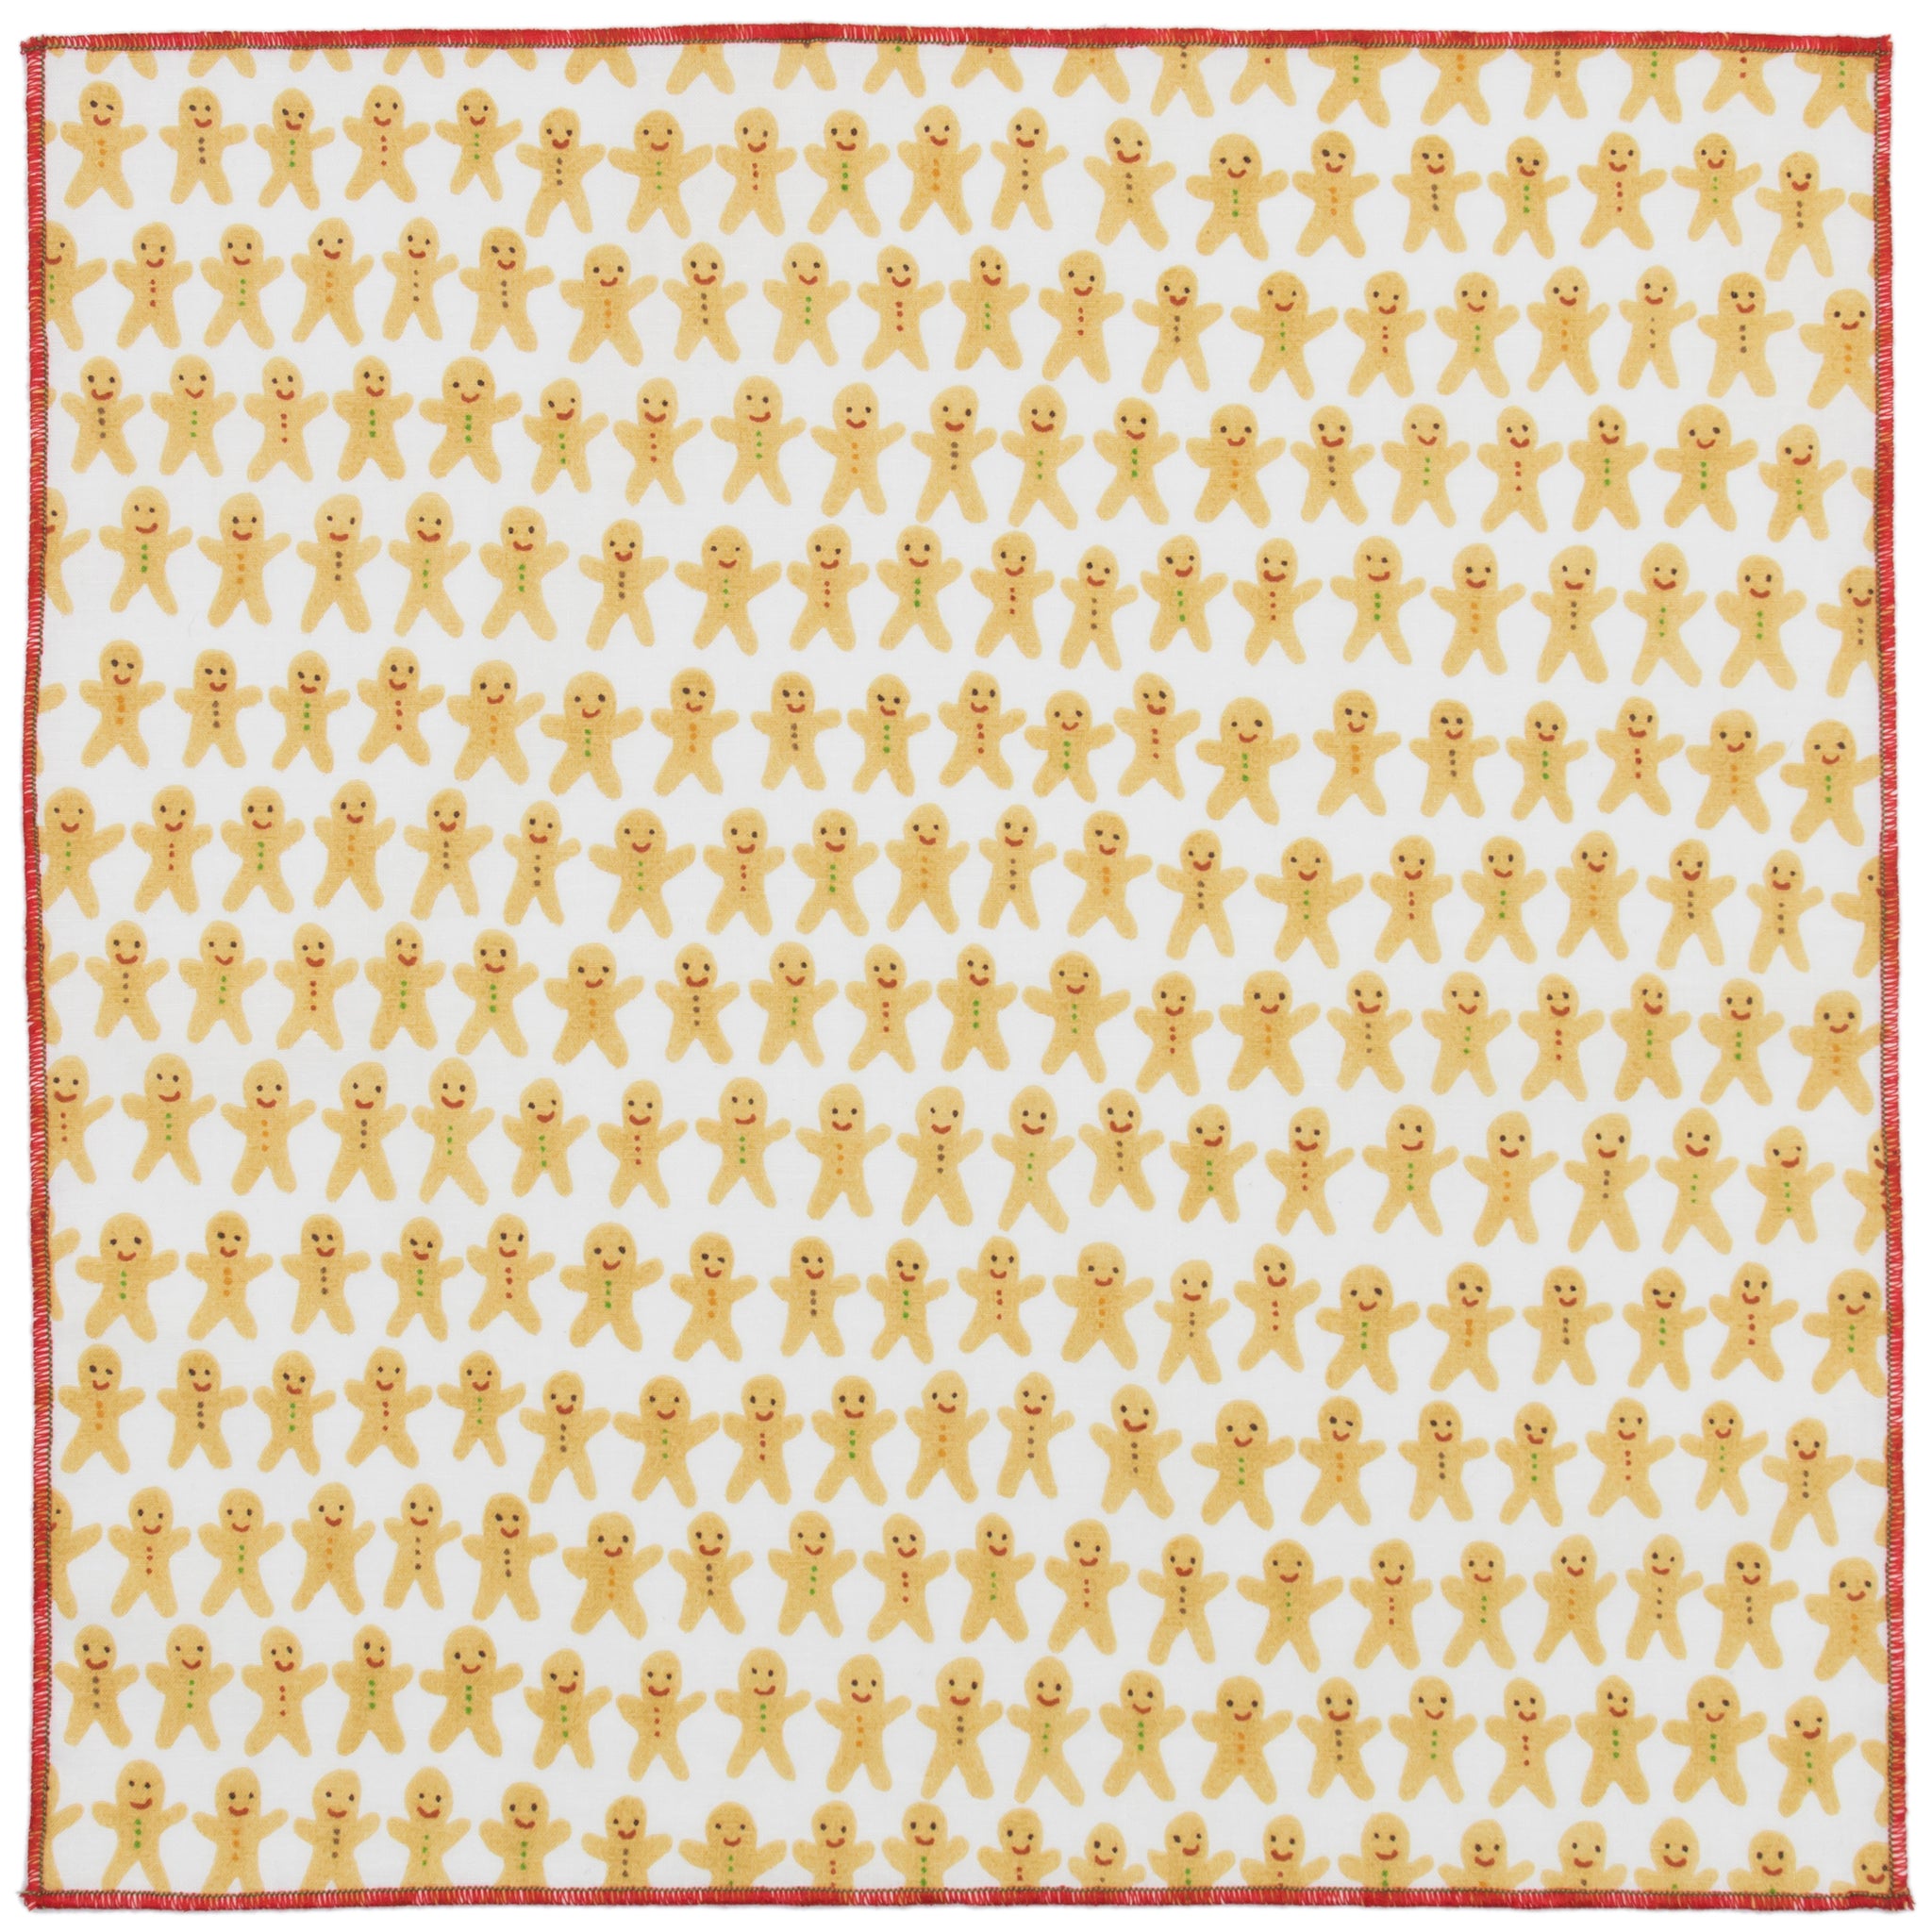 Festive Gingerbread People Pocket Square Made in Canada